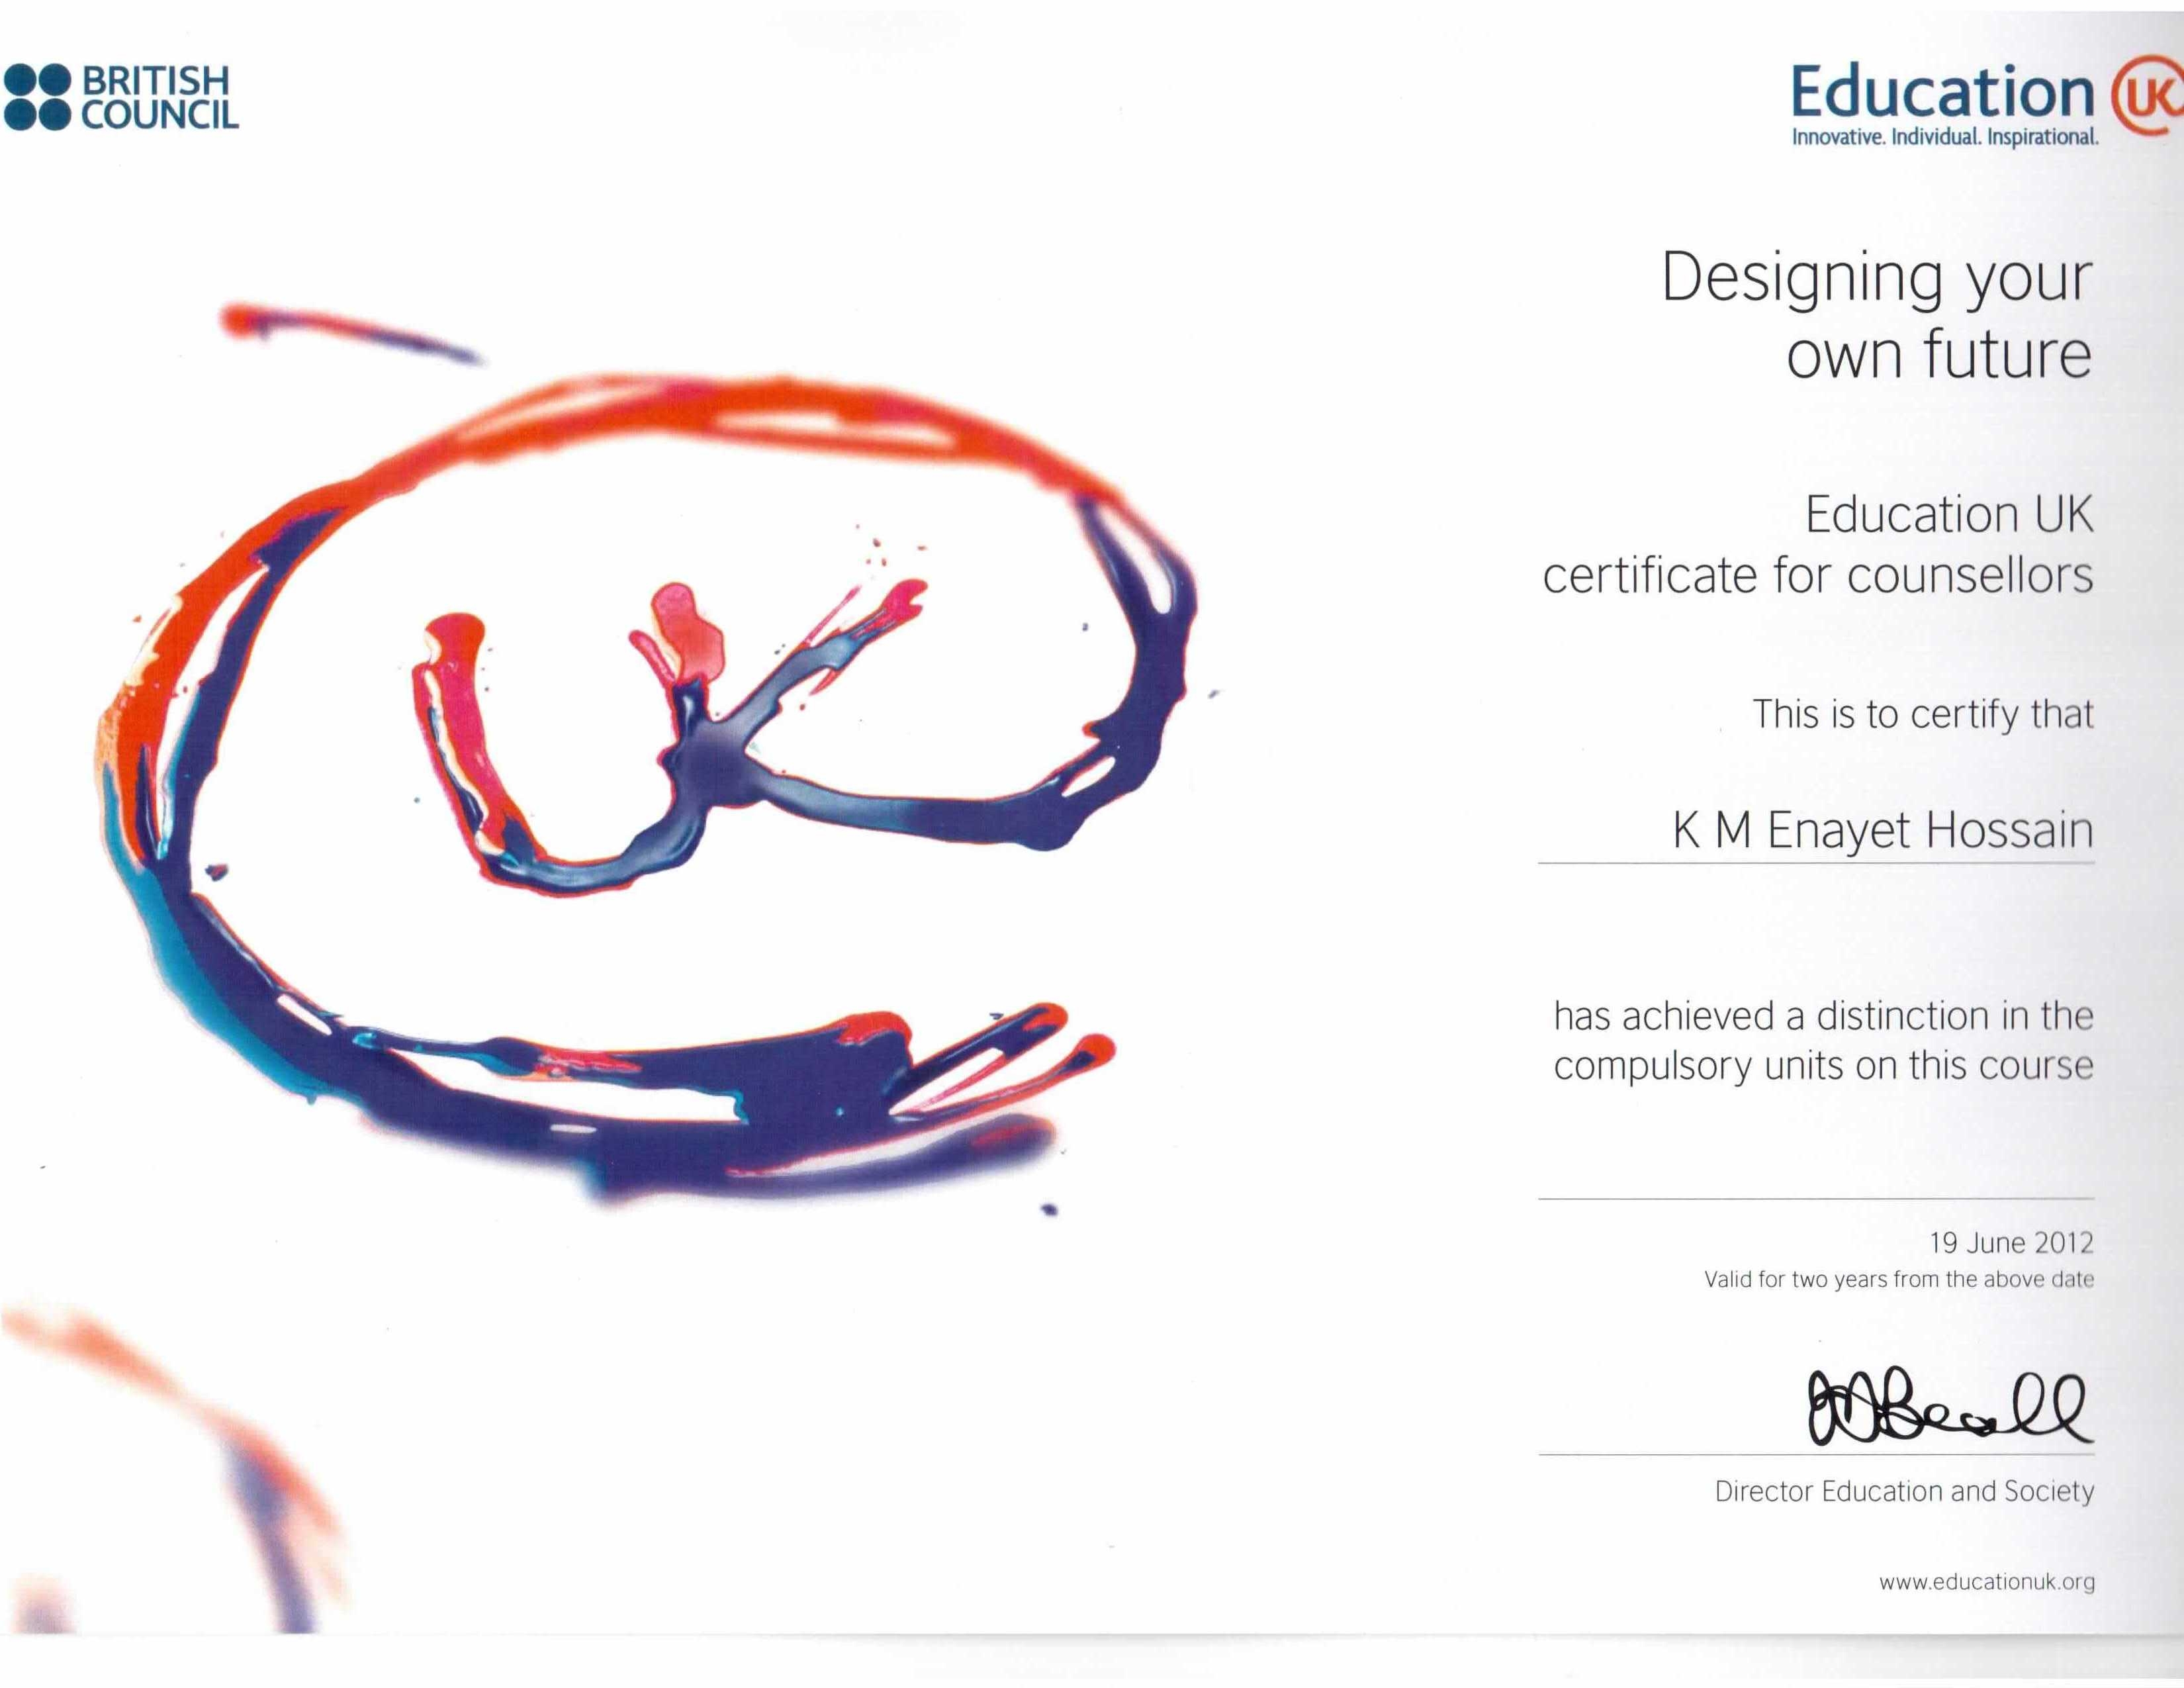 Education UK (British Council) - Certificate for Counsellors